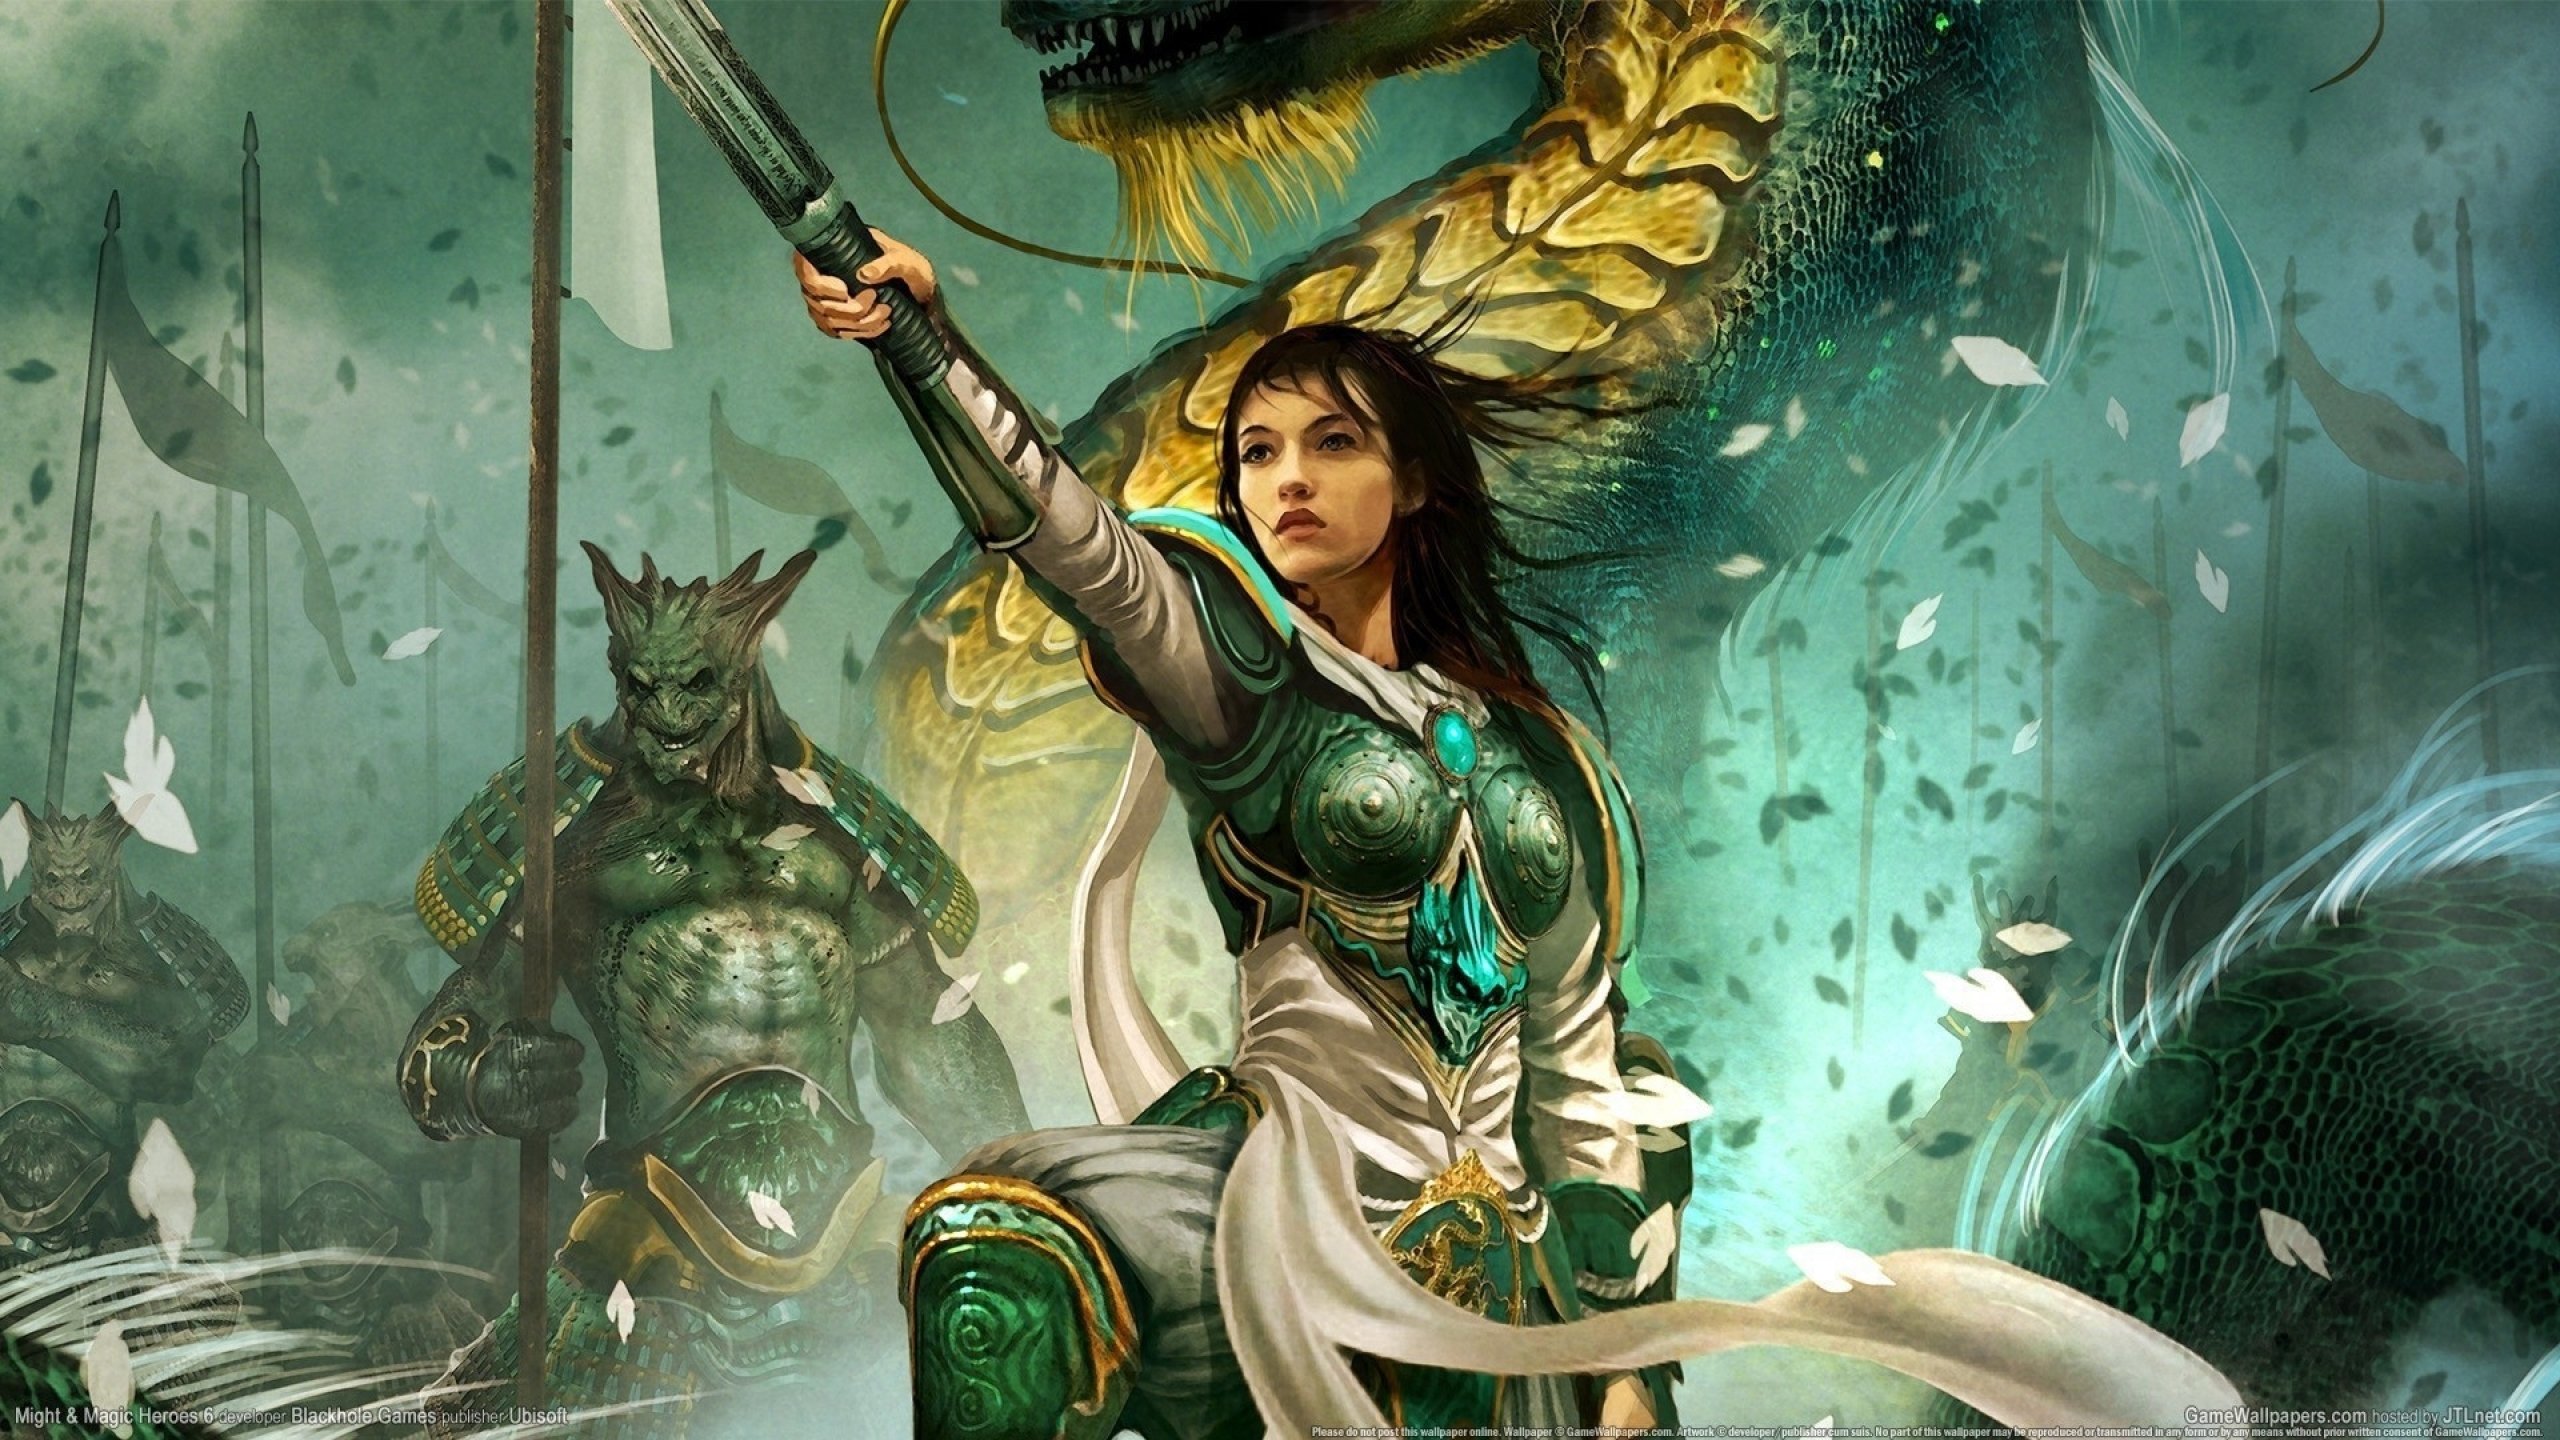 heroes, Might, Magic, Strategy, Fantasy, Fighting, Adventure, Action, Online, 1hmm, Warrior, Girl Wallpaper